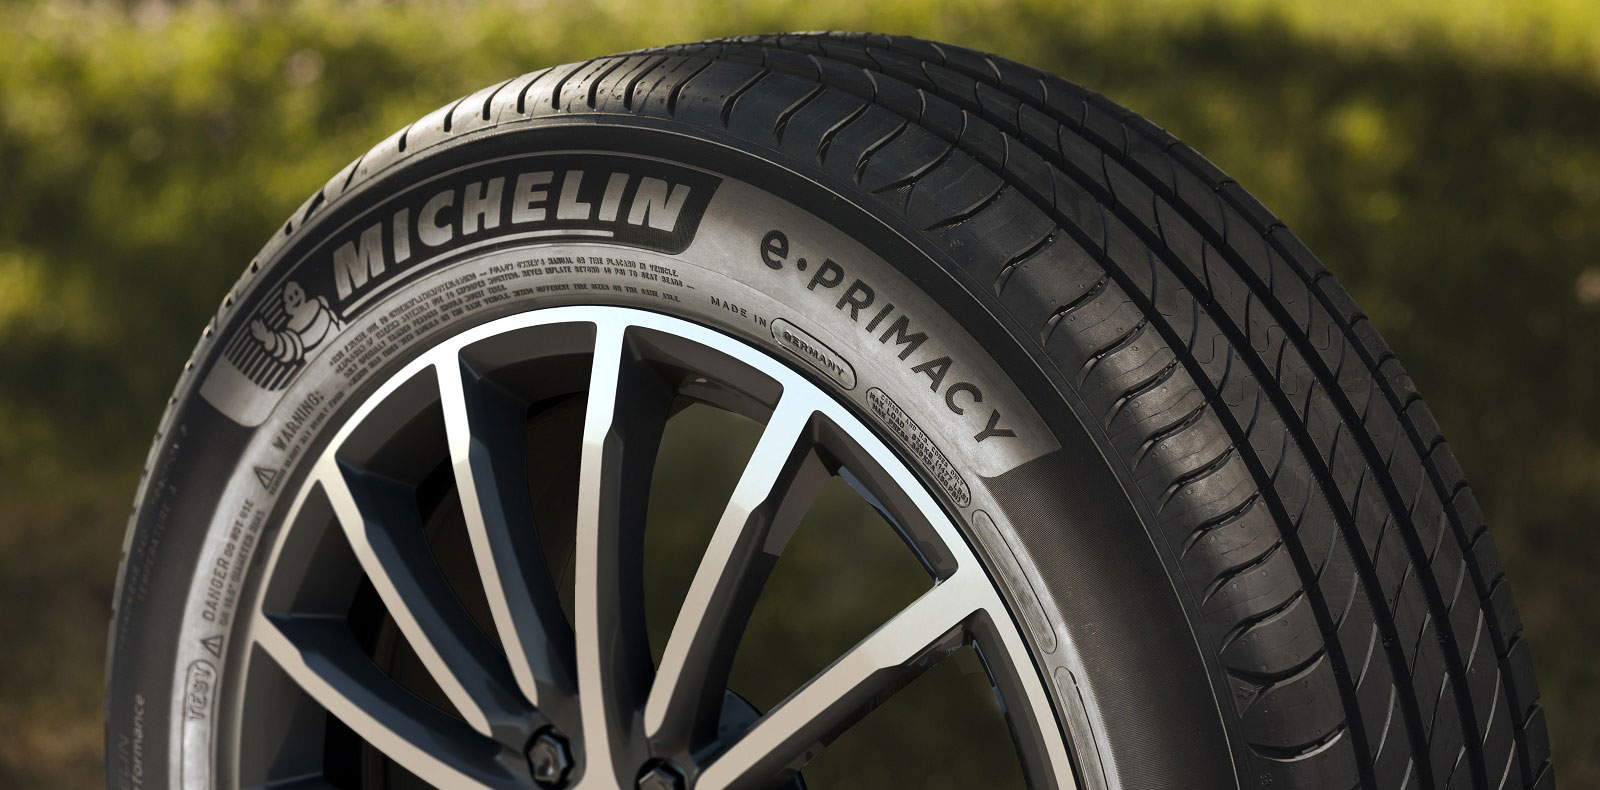 Michelin will use recycled PET plastic waste to make tires.